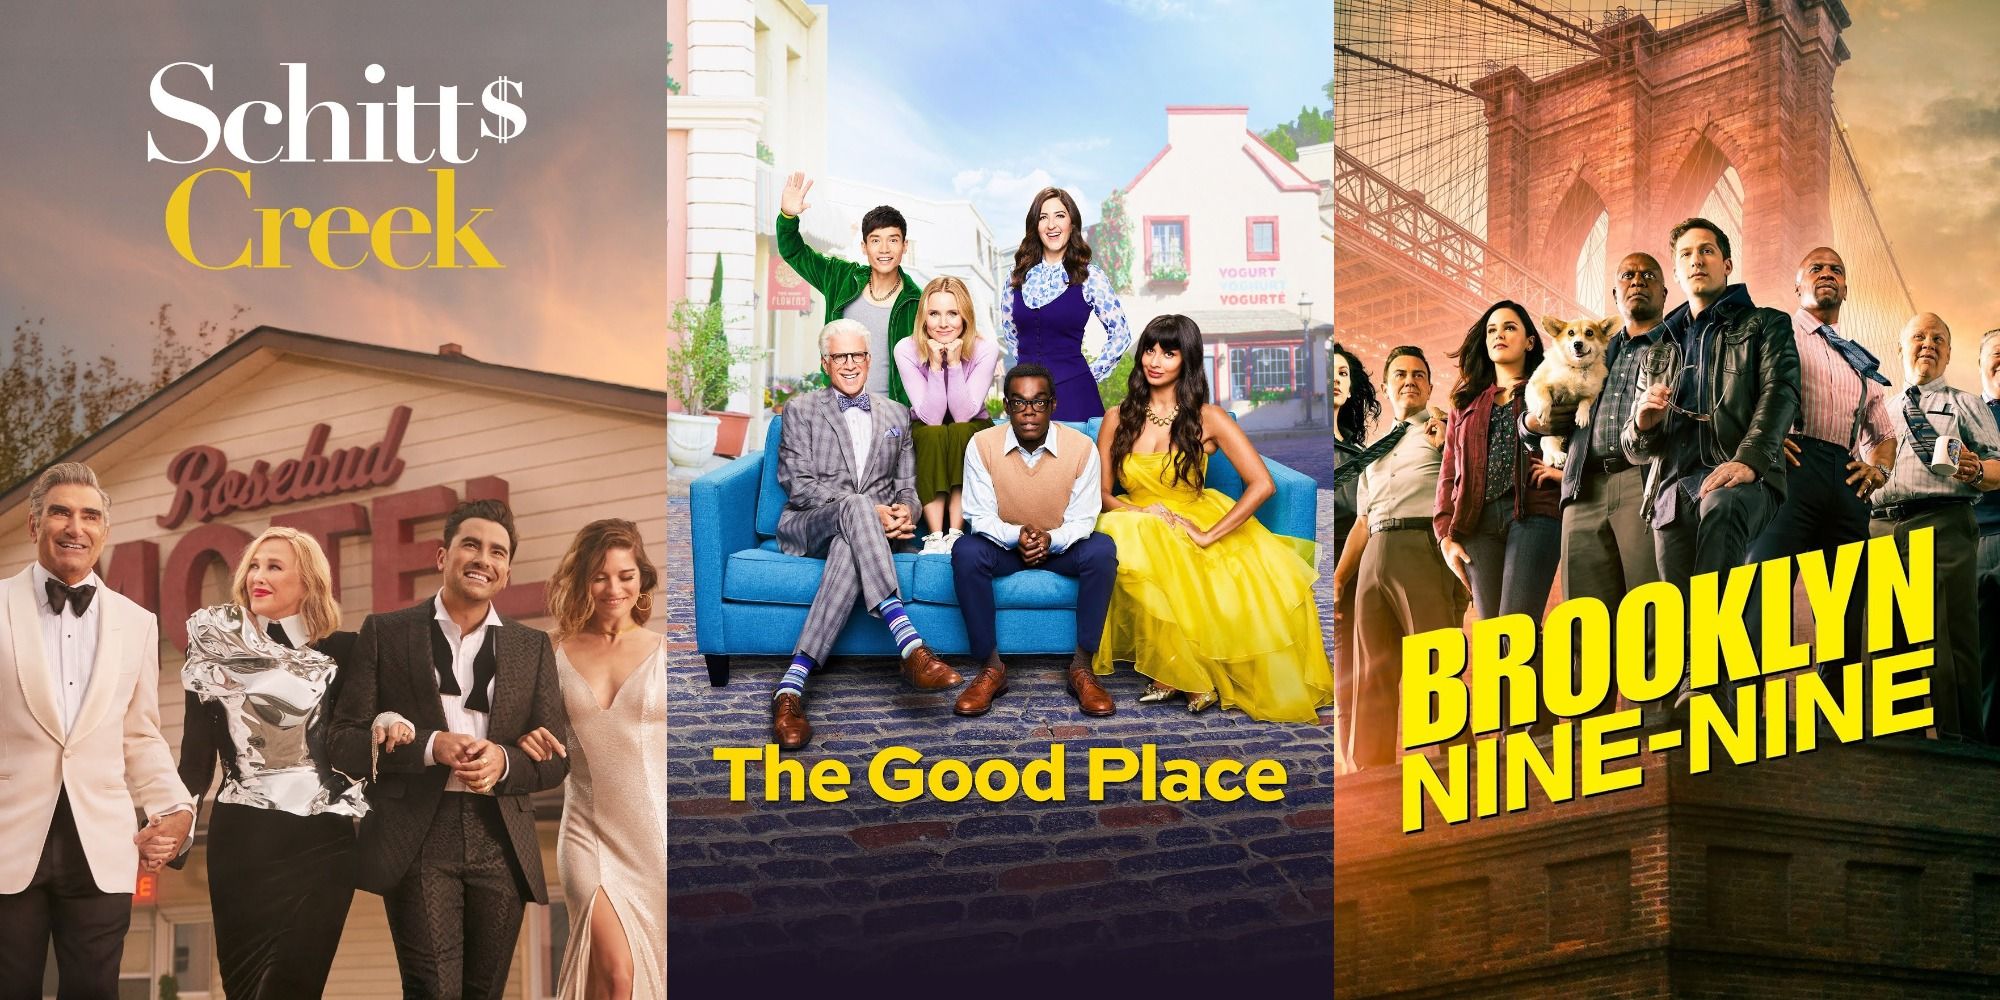 combined posters of Schitt's Creek, Brooklyn Nine-Nine, and The Good Place